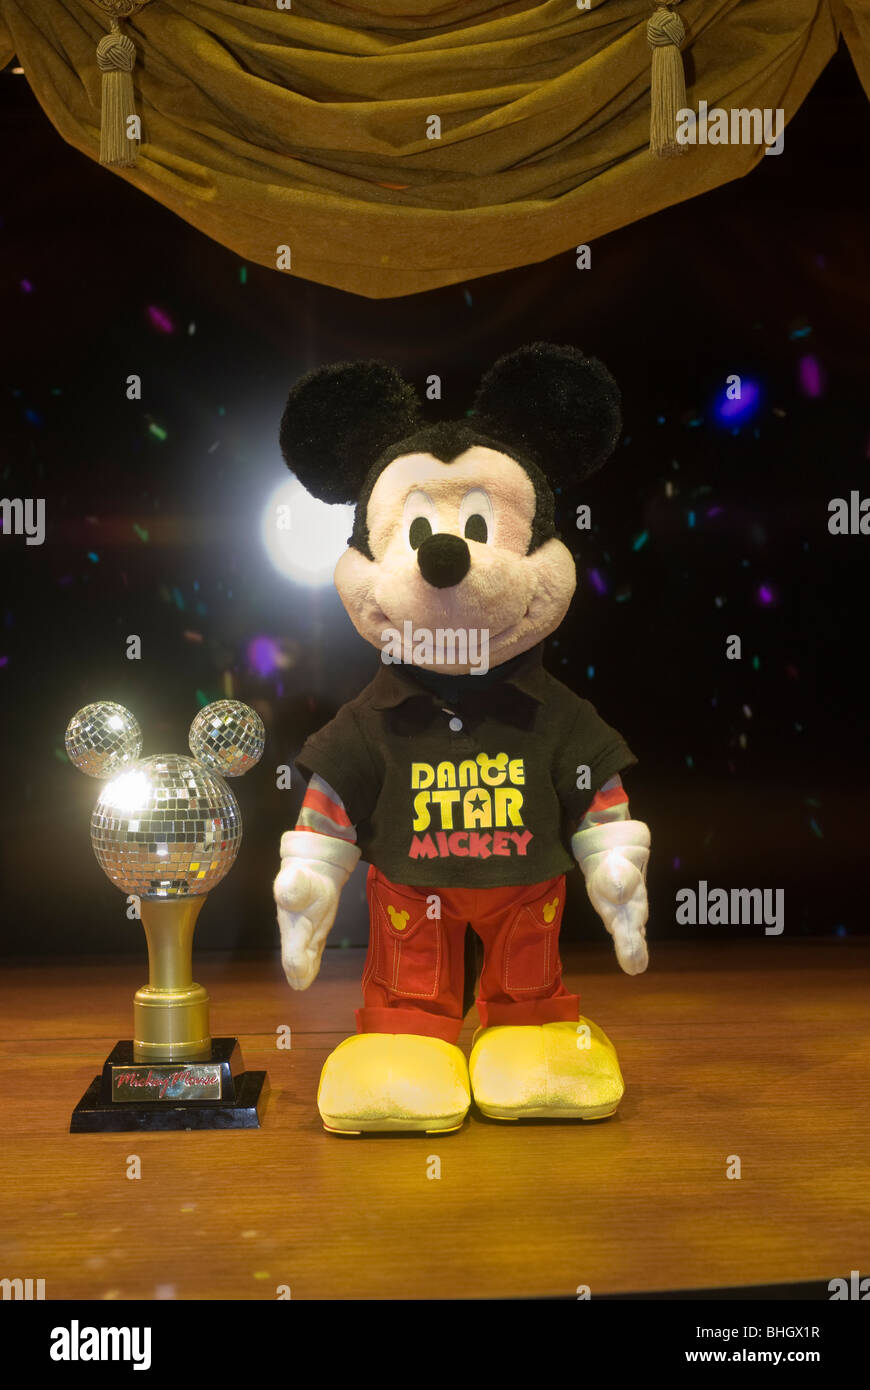 The new Fisher-Price "Dance Star Mickey" doll is unveiled at Toy Fair in New York Stock Photo